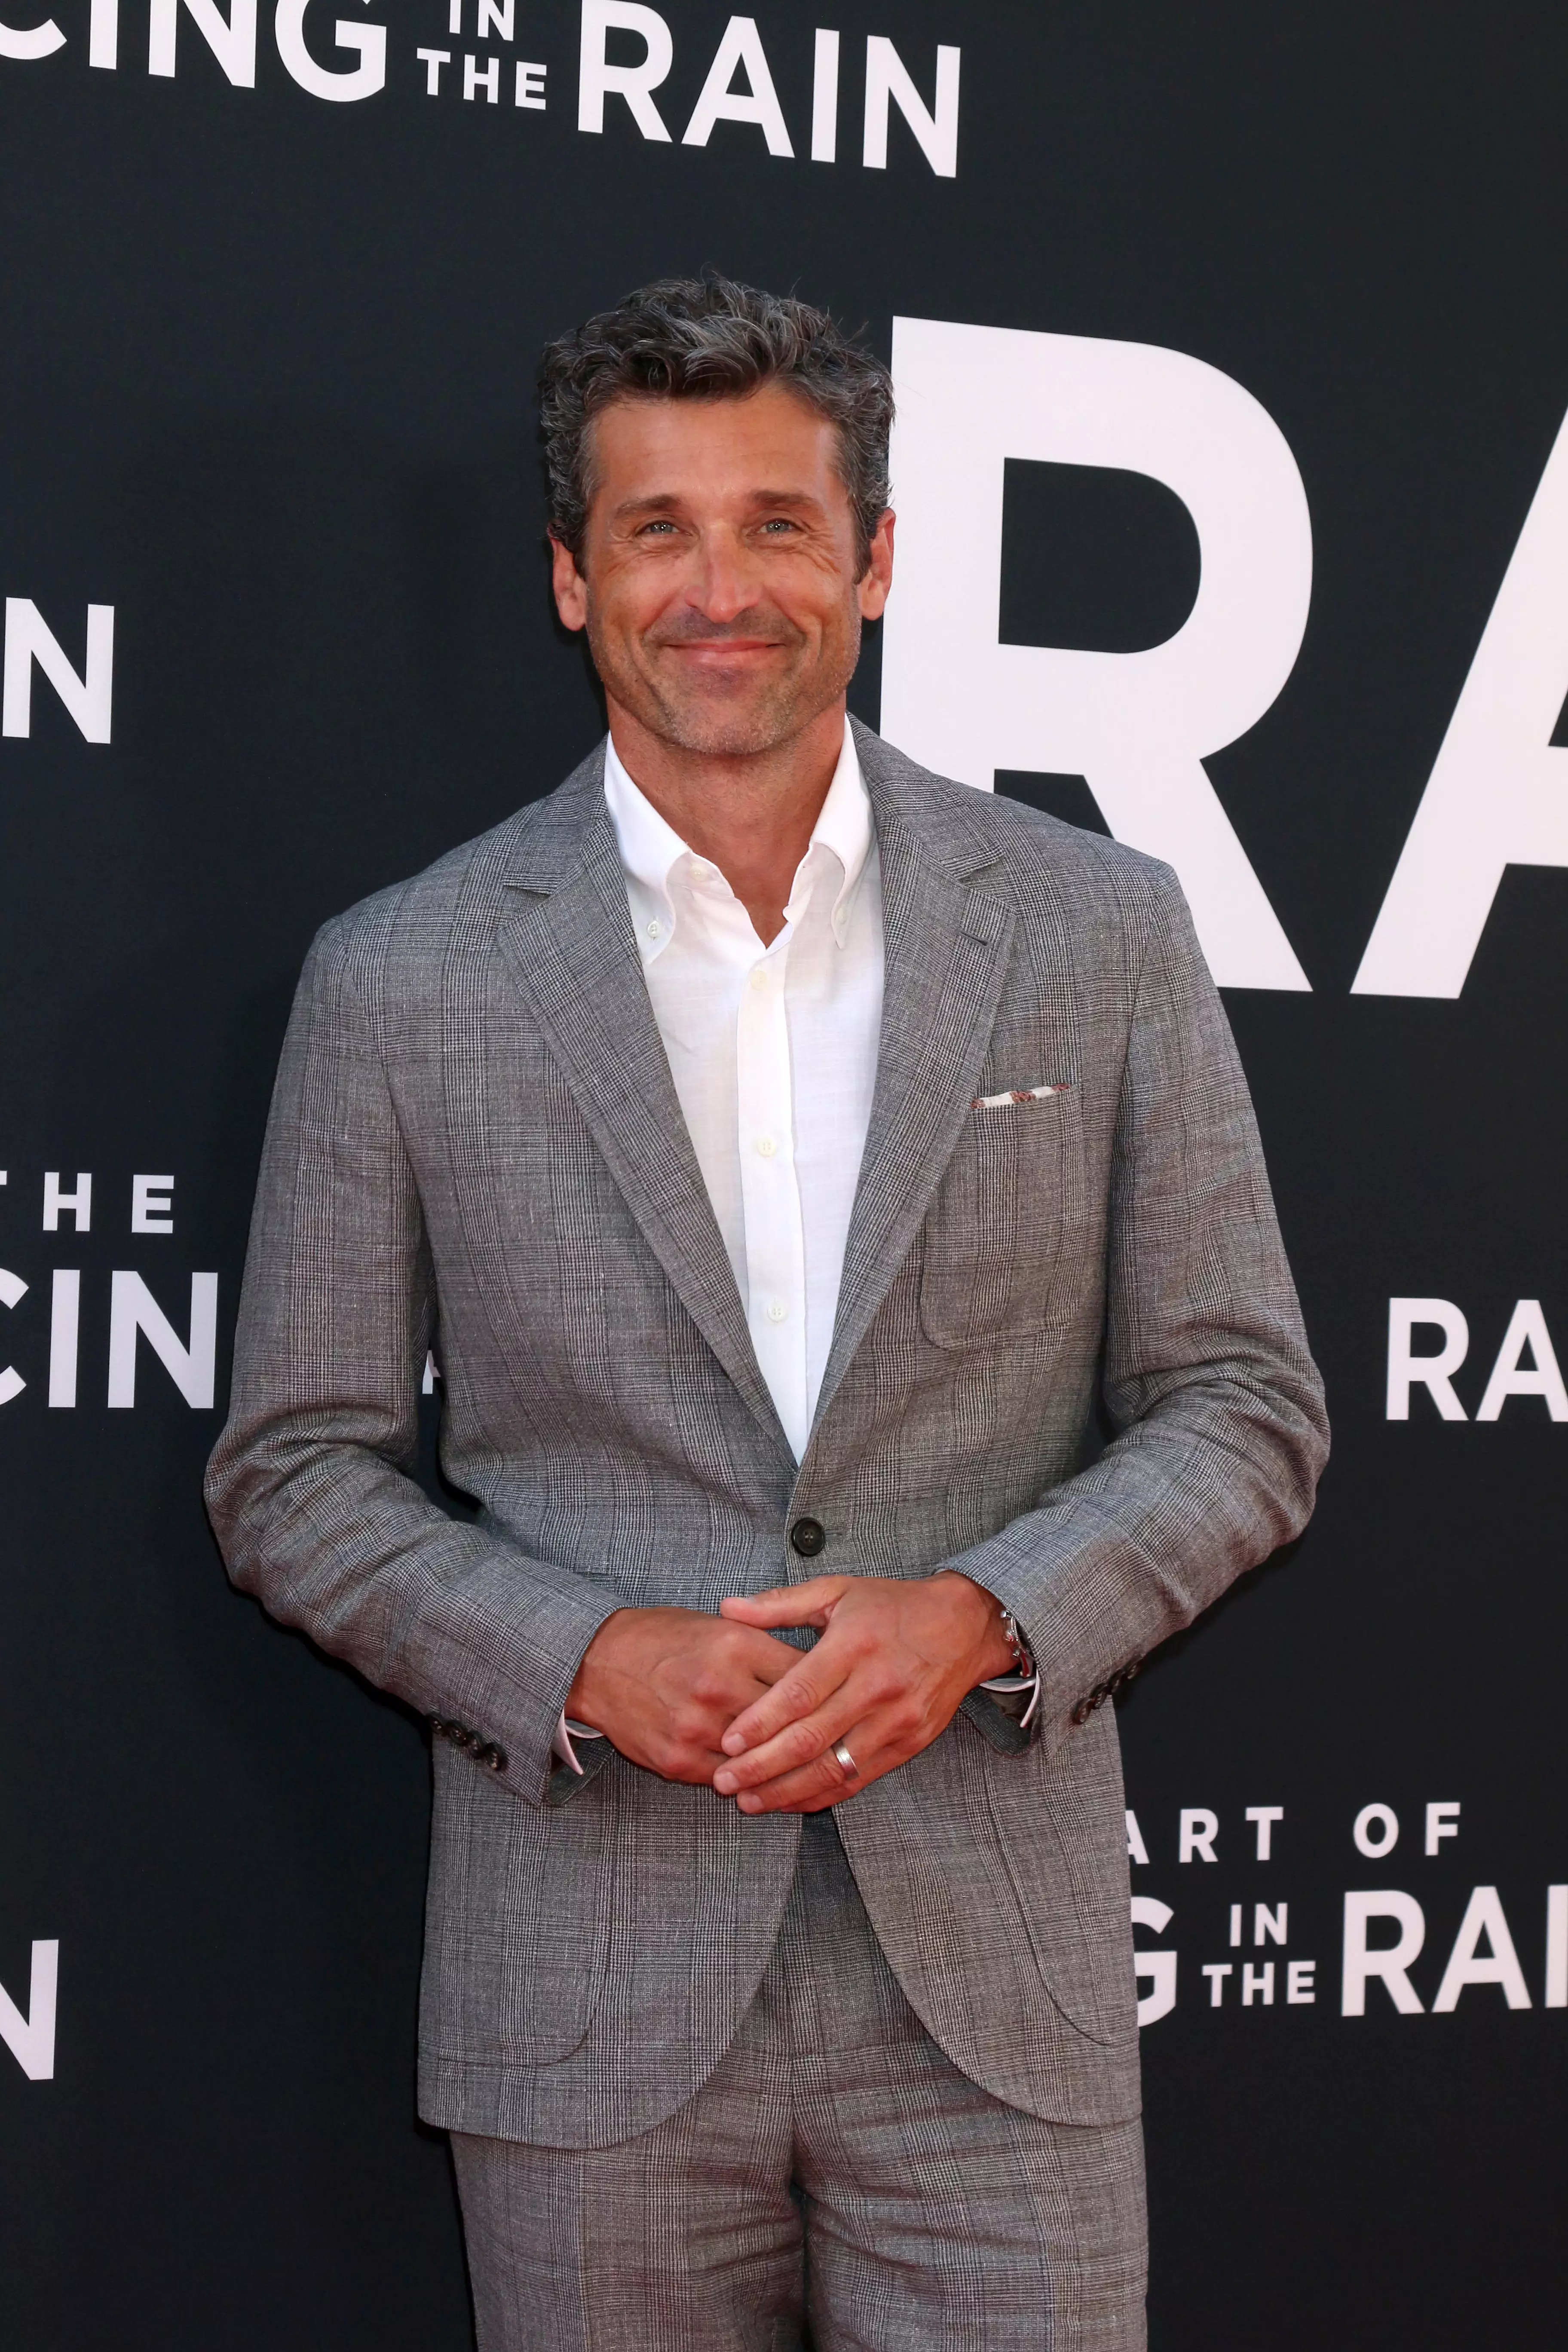 McDreamy will show off his singing skills (